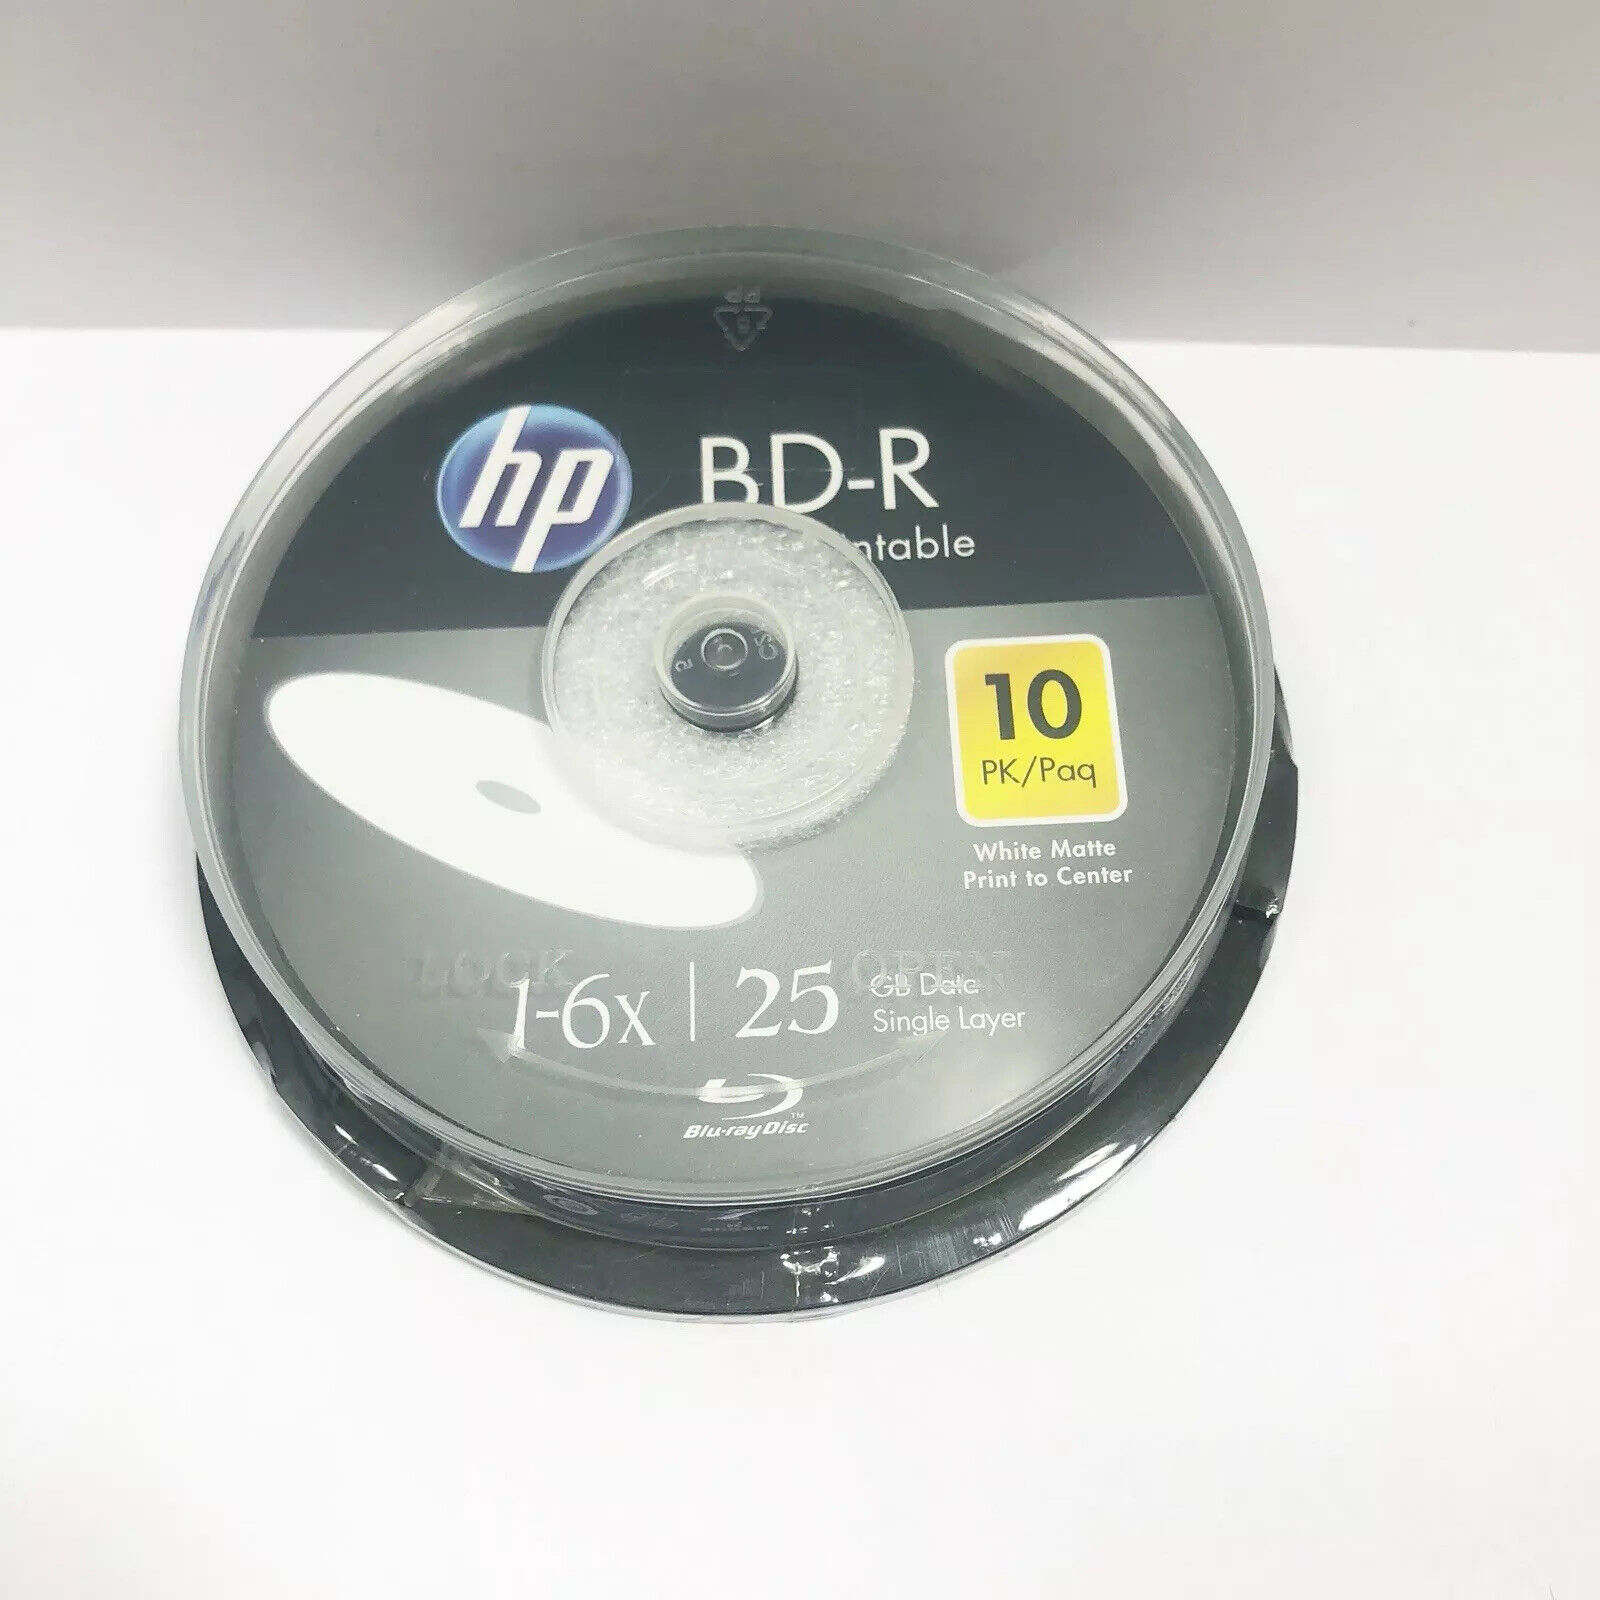 hp Bluray BD-R 25GB Single Layer 1-6x Speed Inkjet Printable Sealed Spindle 10ct